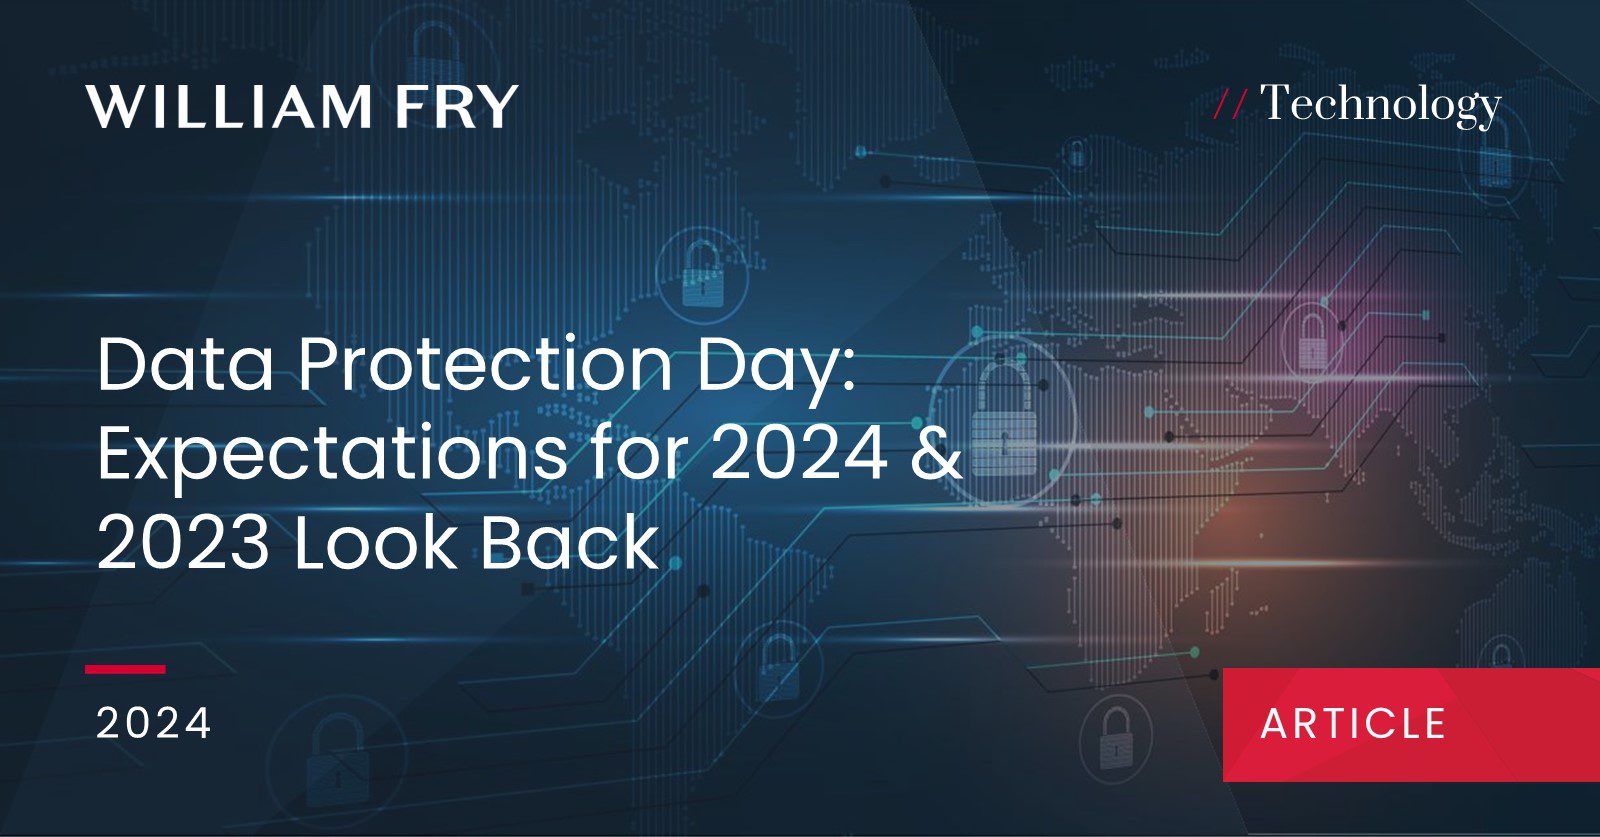 Data Protection Day Expectations for 2024 2023 Look Back